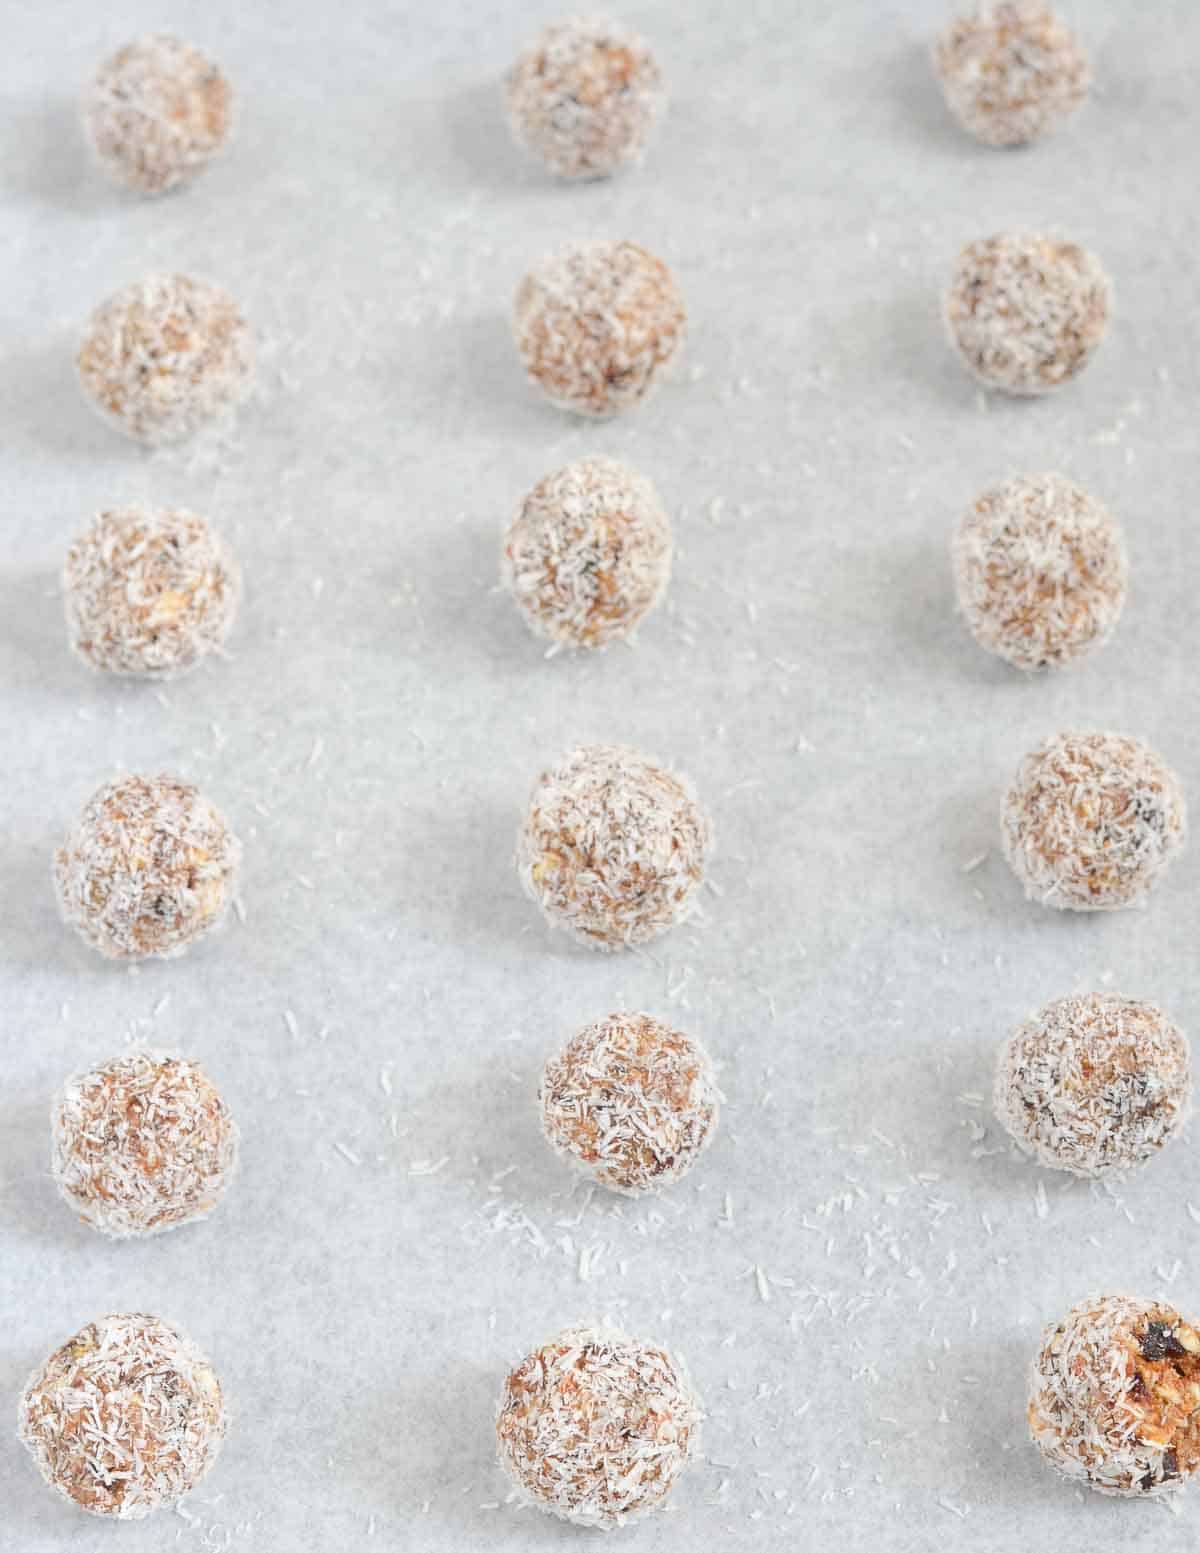 protein bliss balls are lined up after rolling in dry coconut